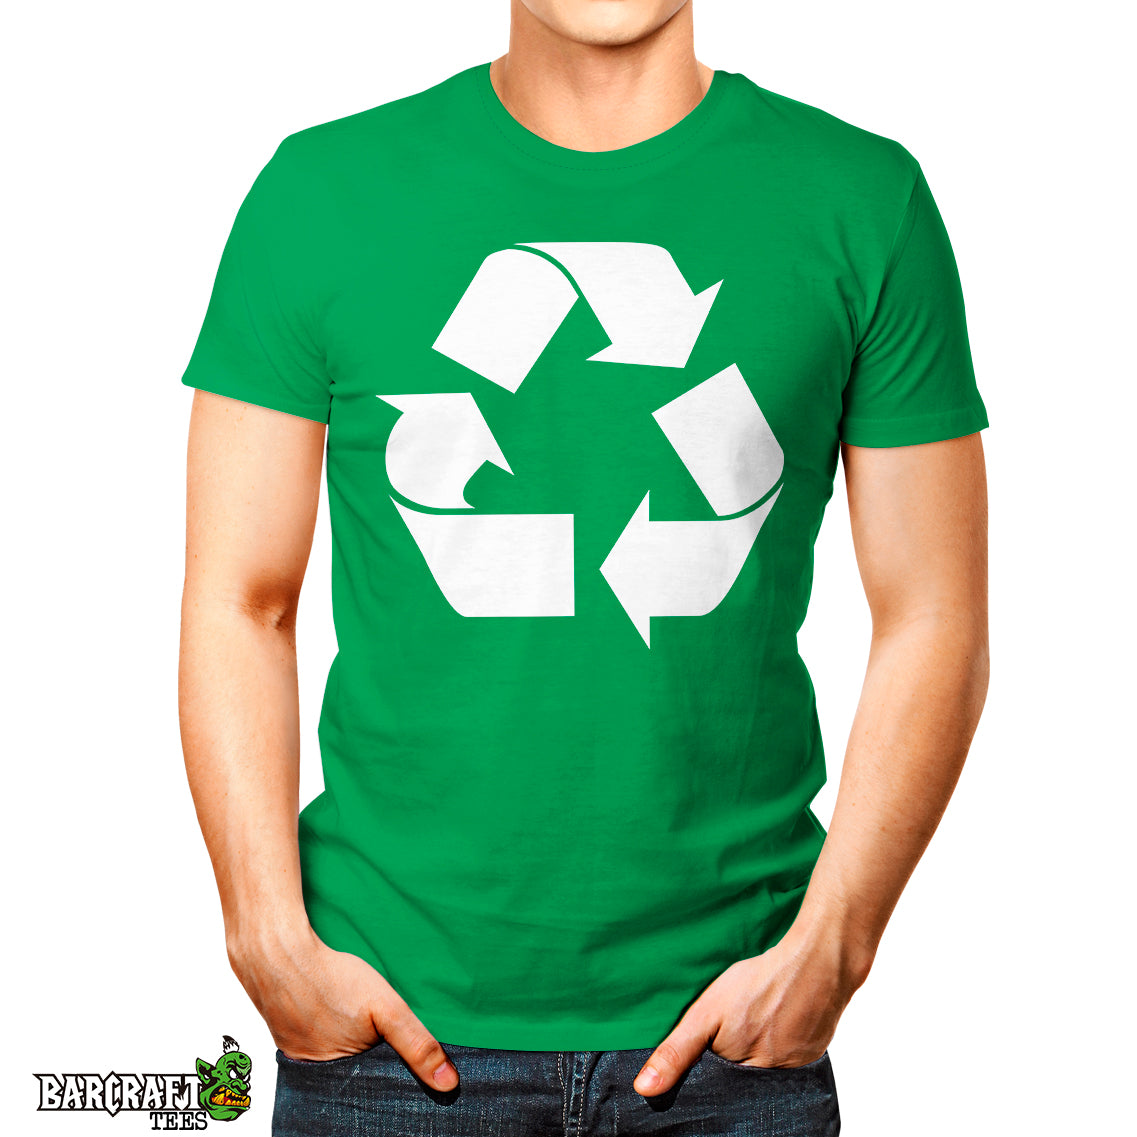 Recycling 